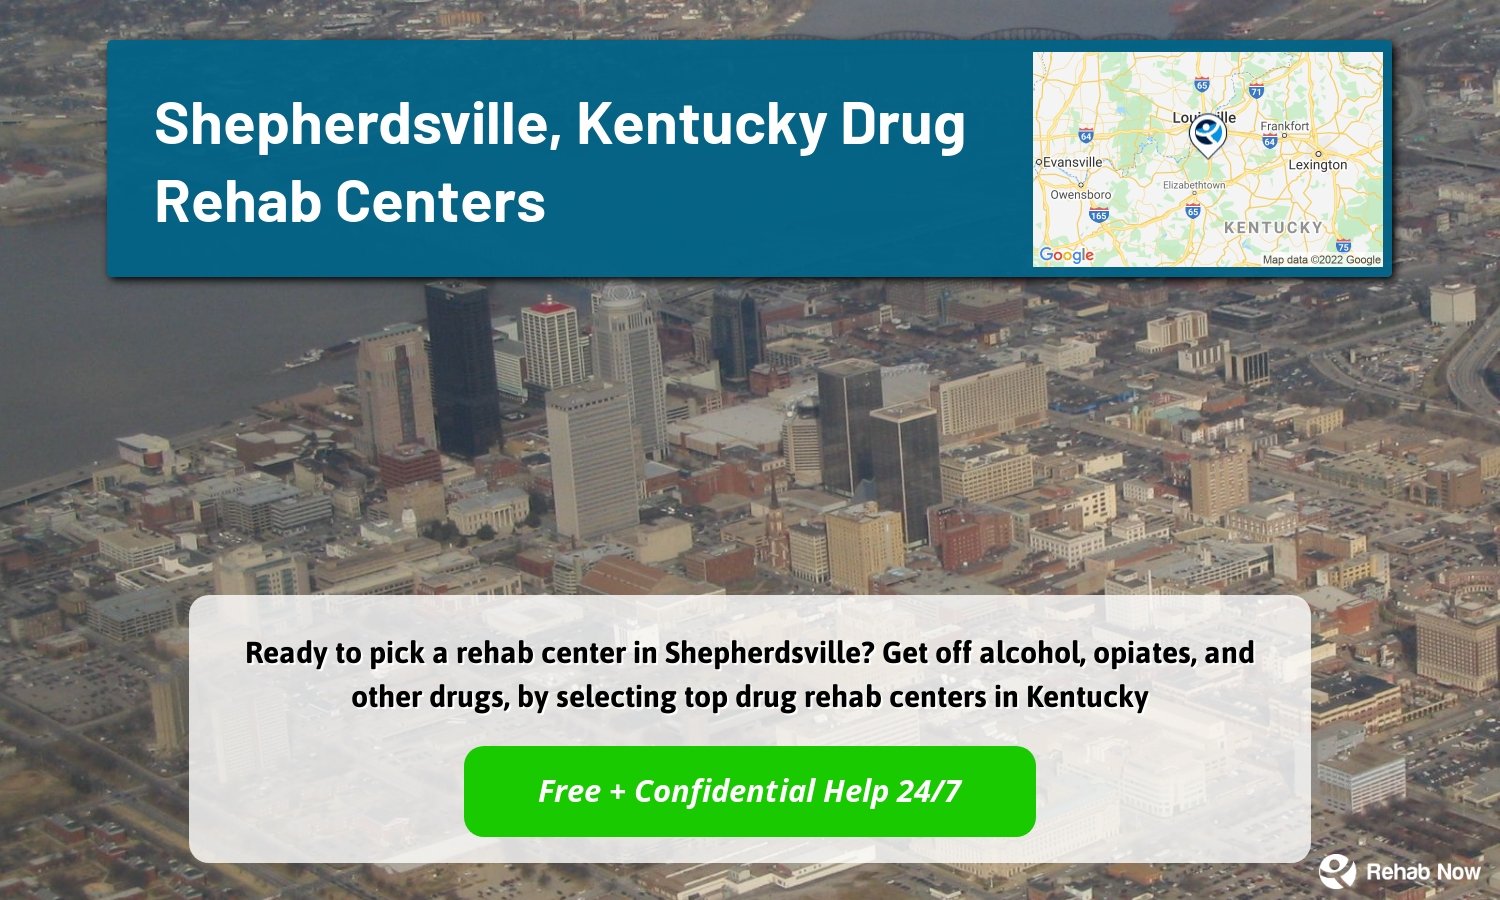 Ready to pick a rehab center in Shepherdsville? Get off alcohol, opiates, and other drugs, by selecting top drug rehab centers in Kentucky